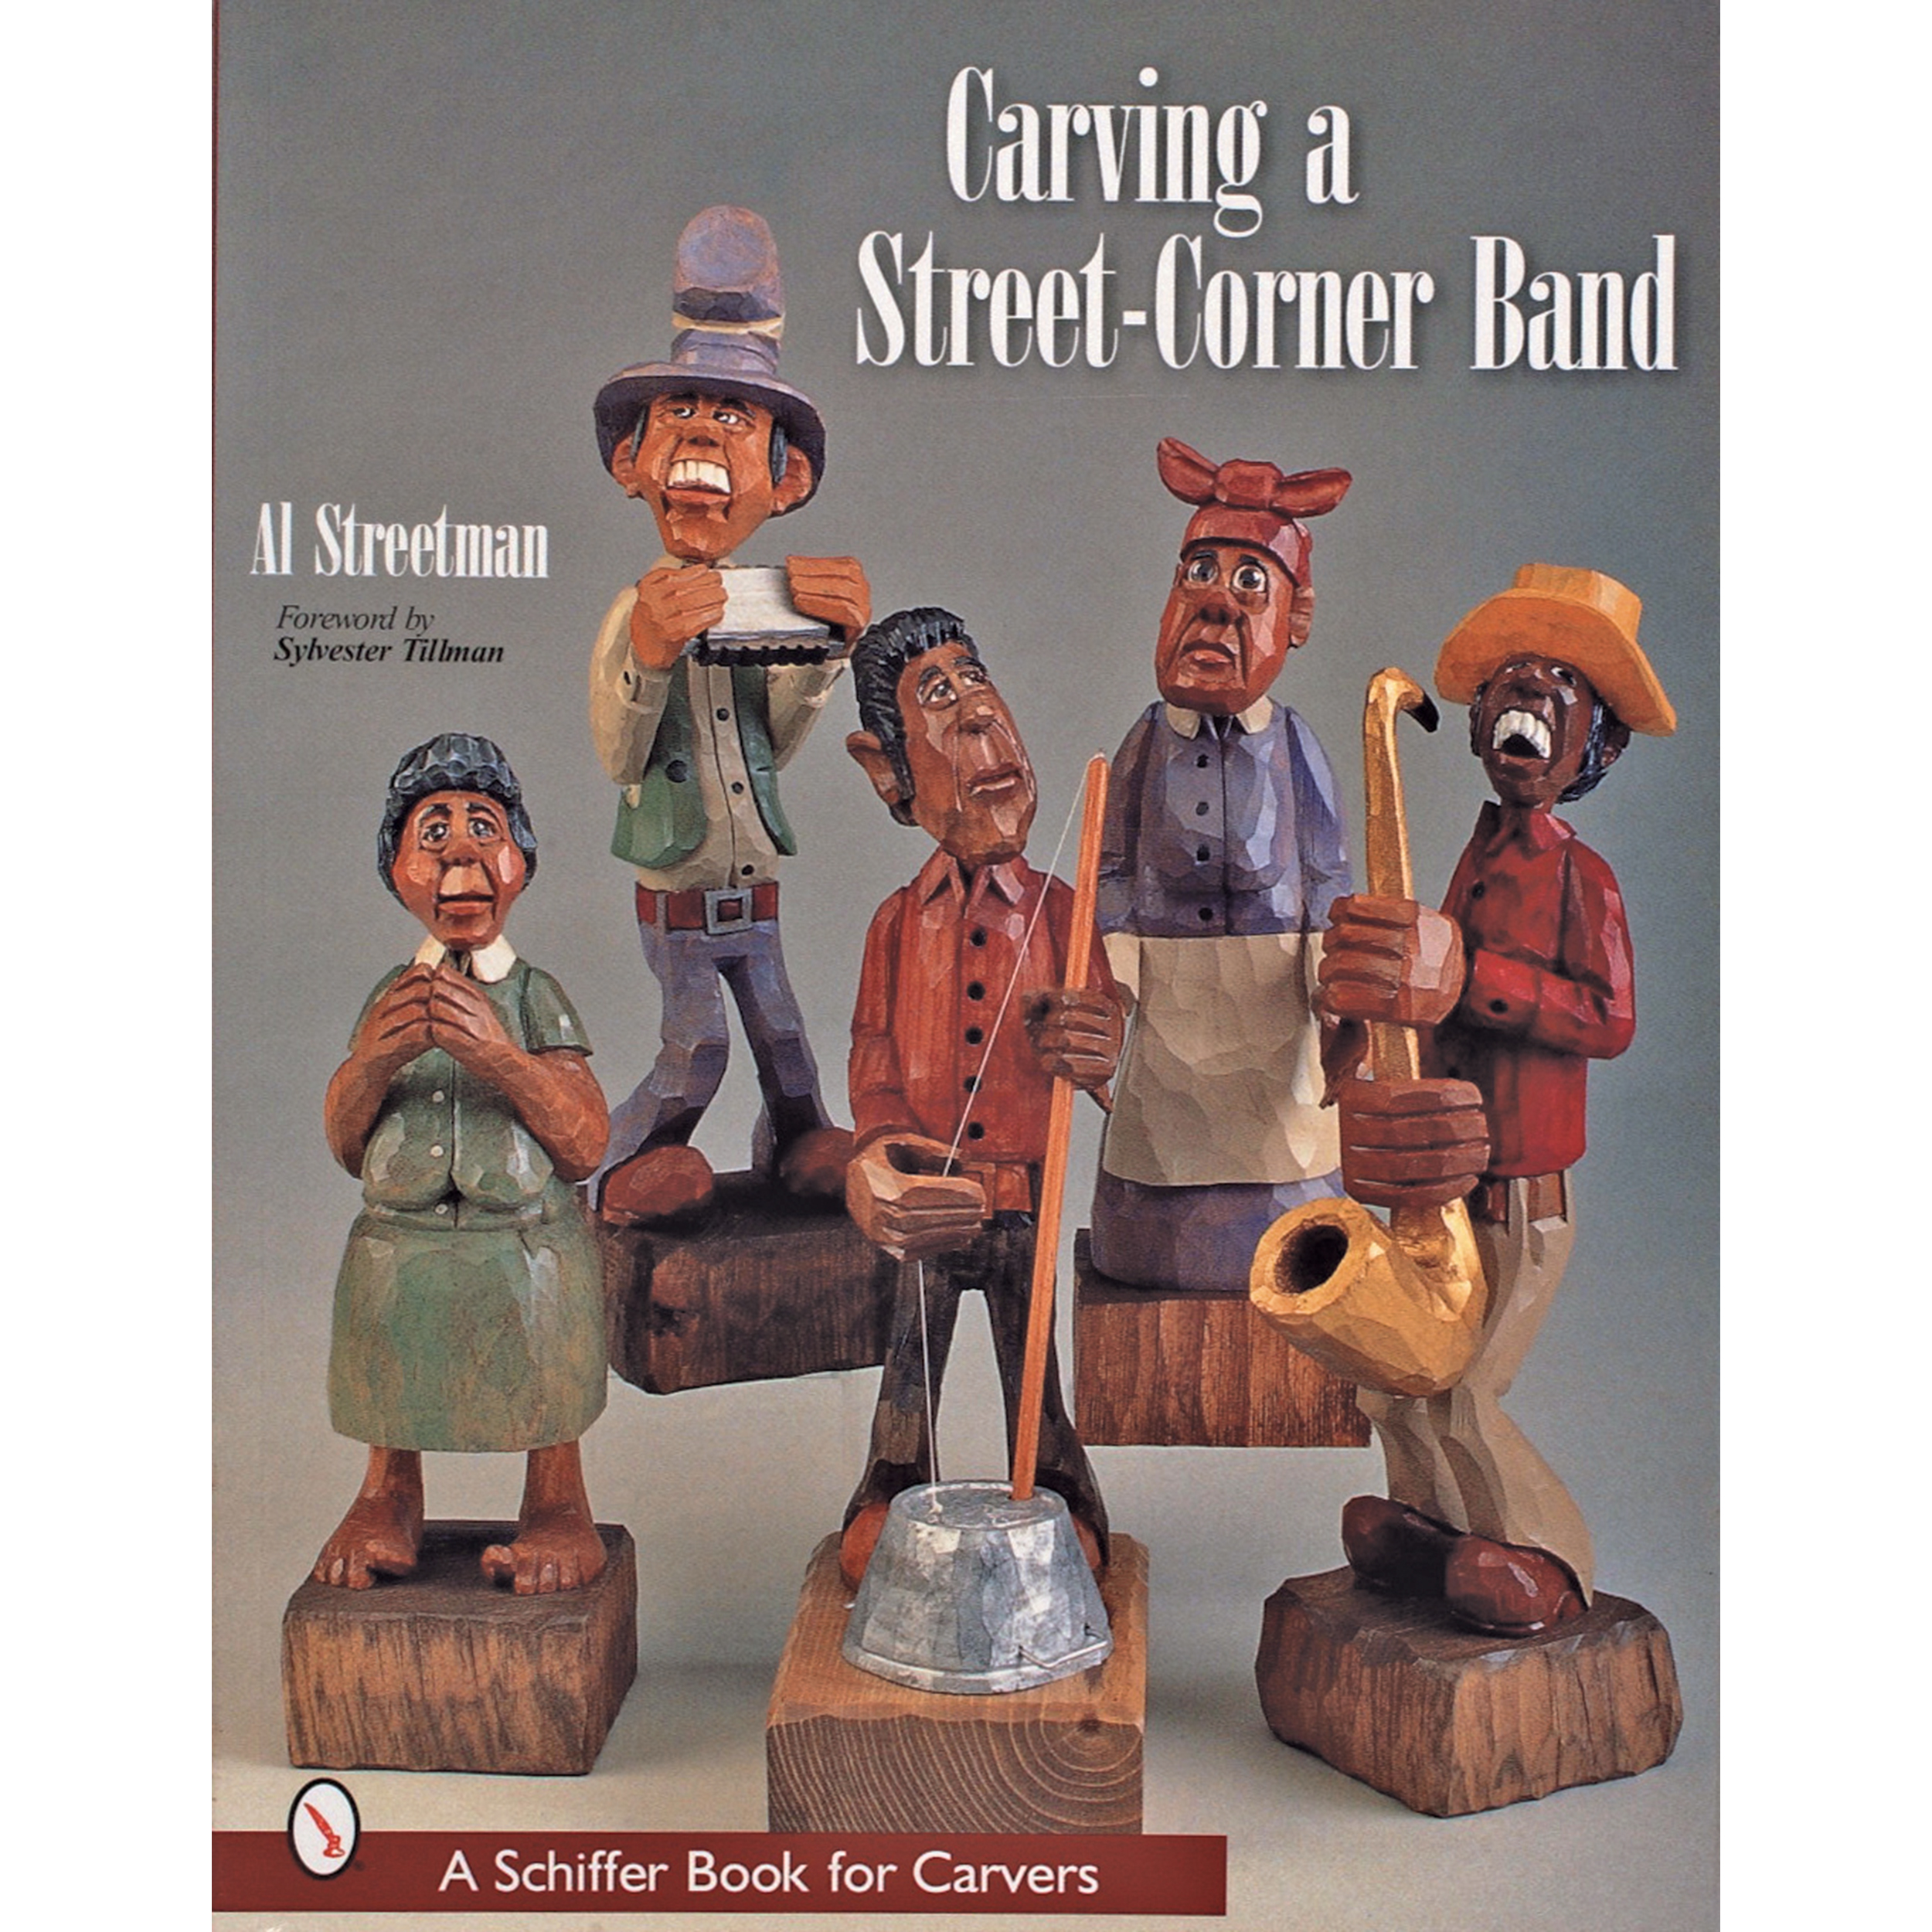 Carving A Street-corner Band